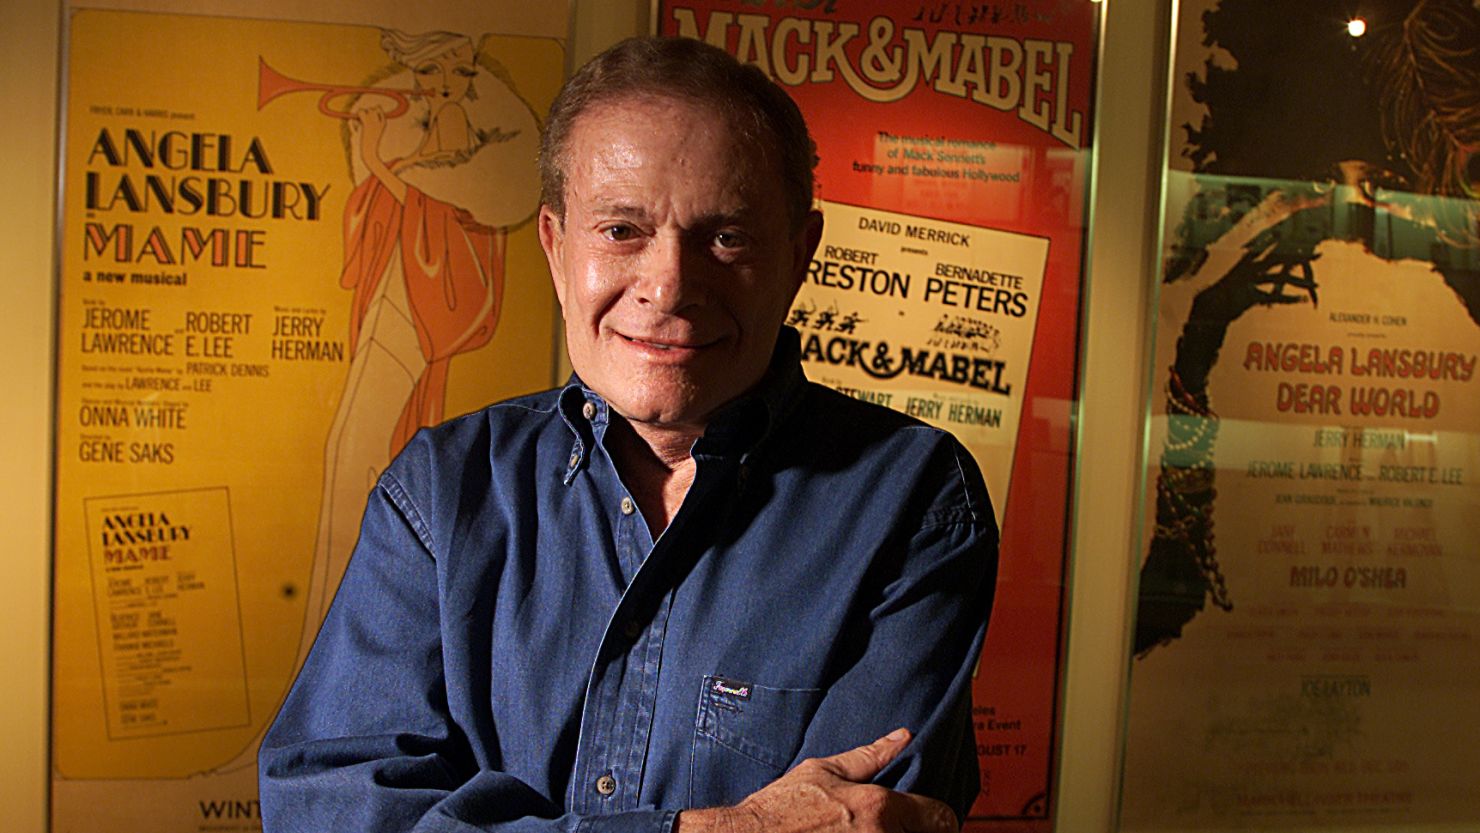 Jerry Herman, a famed Broadway composer whose musicals include "Hello, Dolly!" and "Mame," has died at 88. 